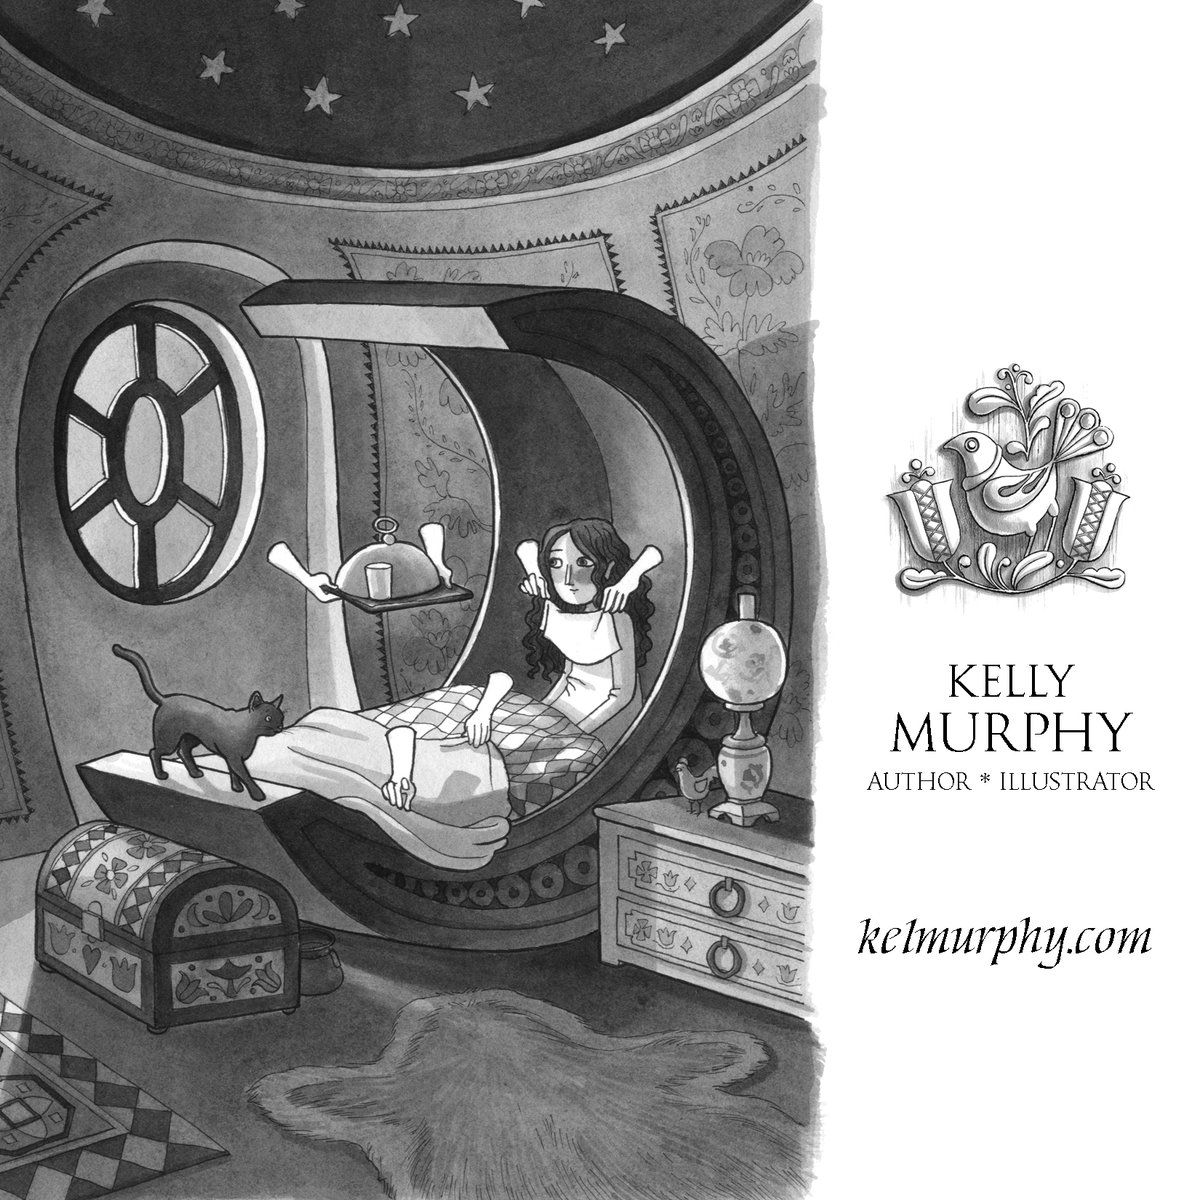 Good eve and happy #kidlitpostcard day! Thrilled to see everyone's works.

I'm an illustrator and sometimes shy author who loves all types of stories, but especially those that teeter on the bizarre side. Feel free to see more at kelmurphy.com